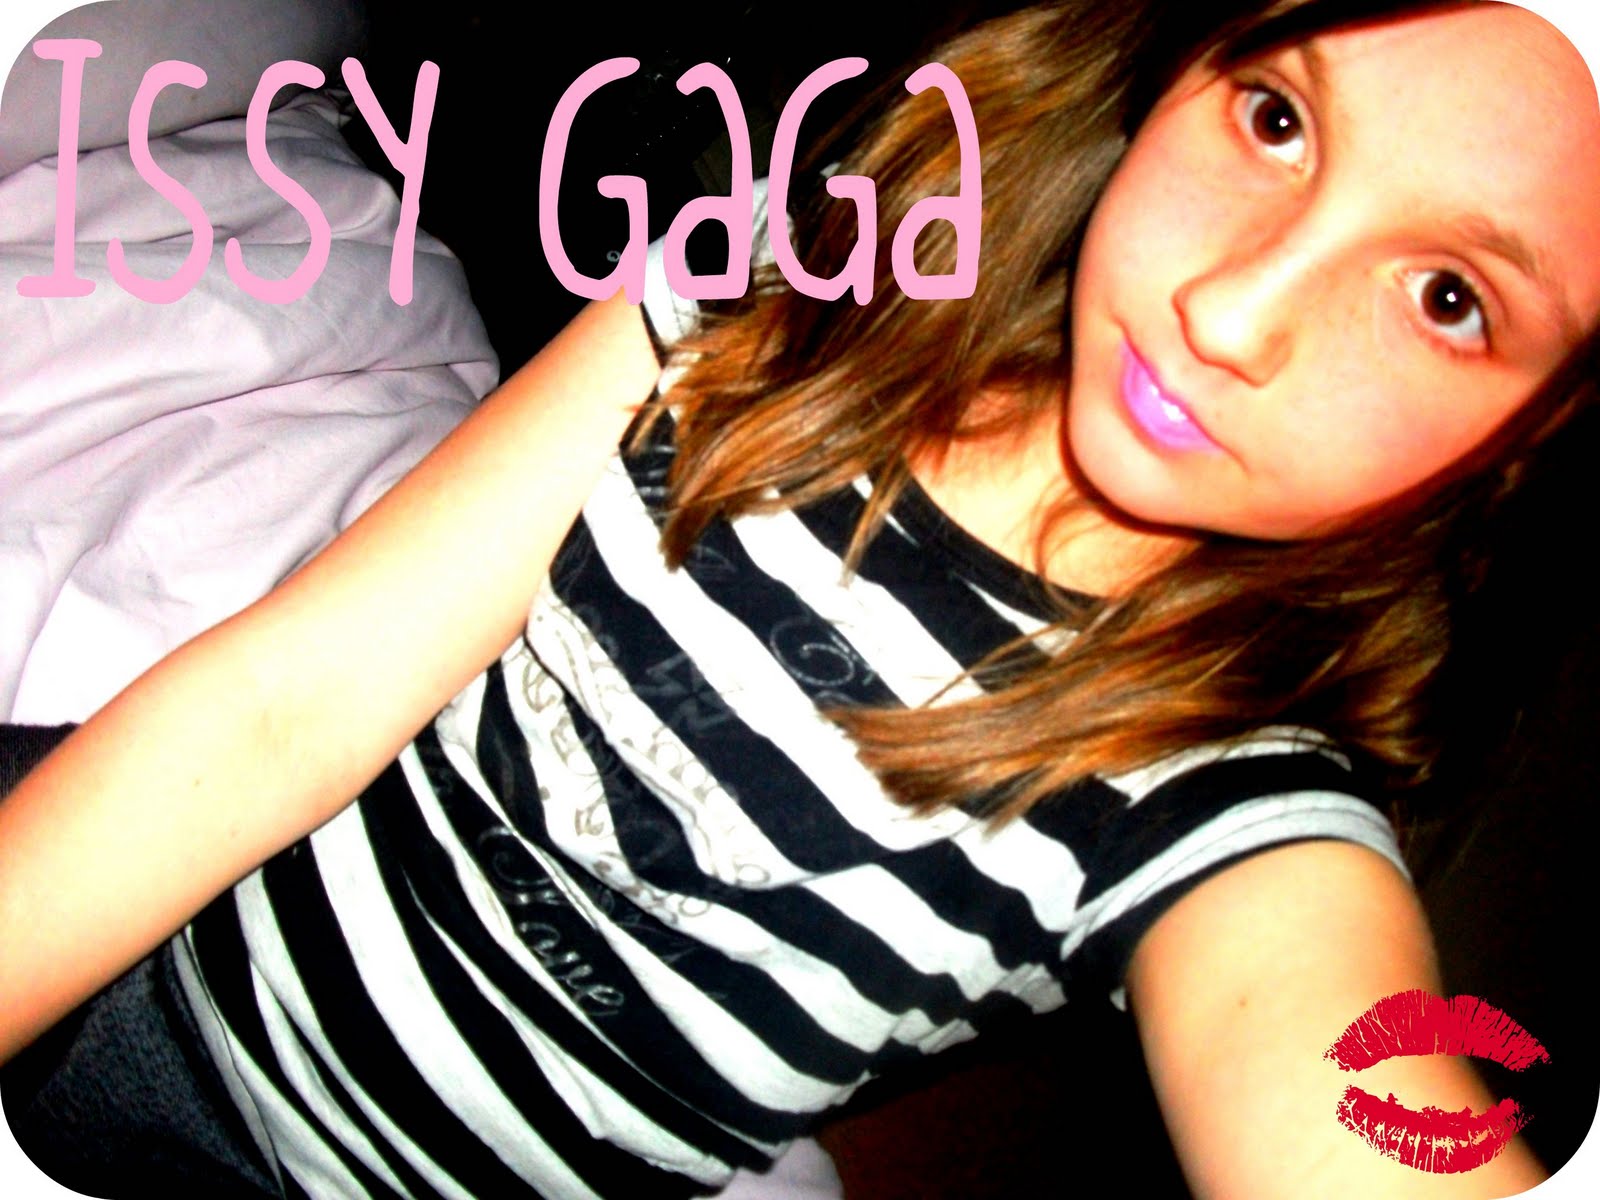 Issy Gaga and The Life Of Her World